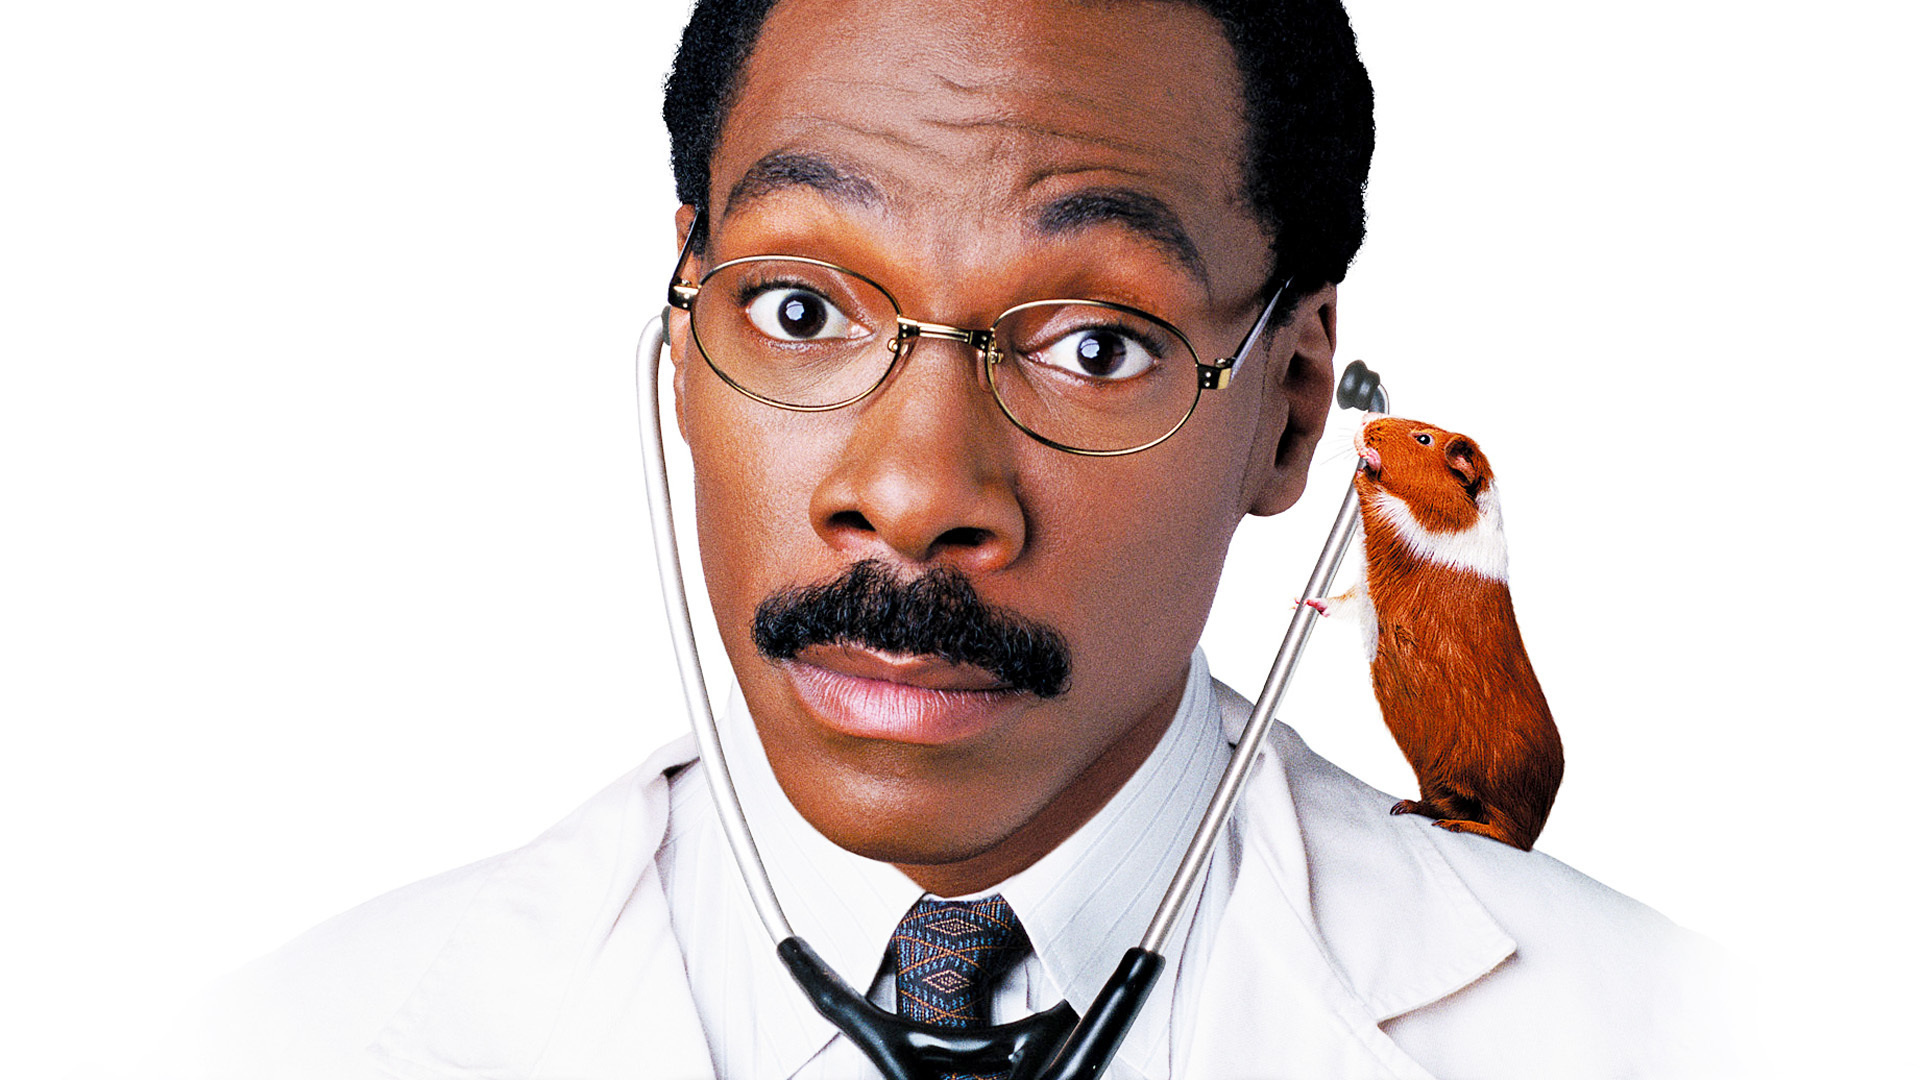 Eddie Murphy: Dr. Dolittle, a physician who can talk to animals, Movie actor. 1920x1080 Full HD Wallpaper.